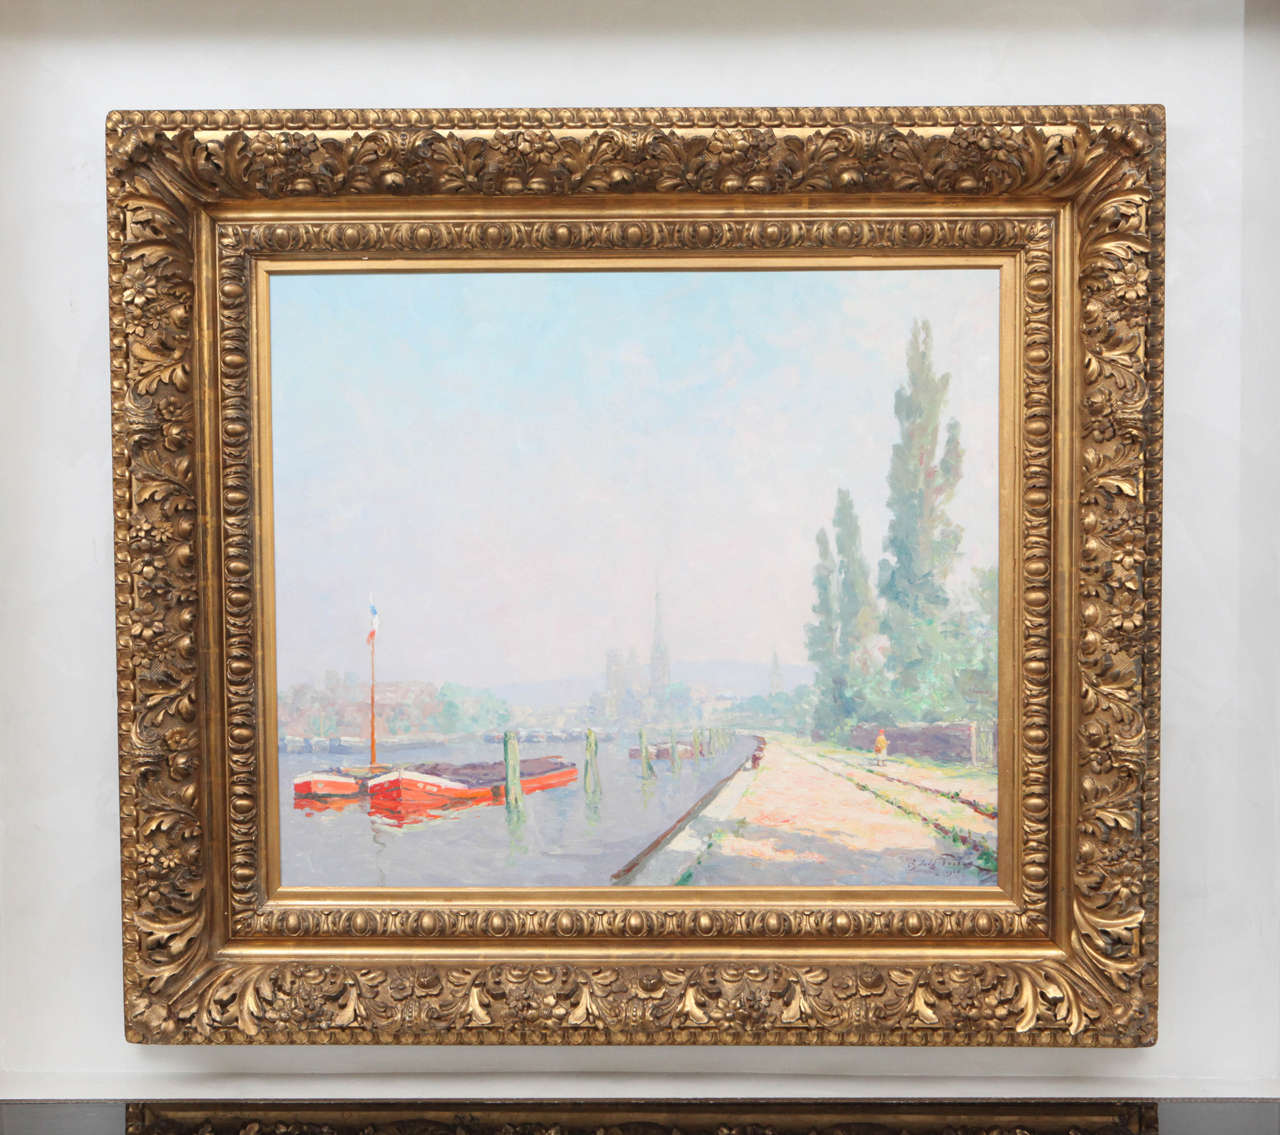 1926 Oswald Poreau oil painting of river scene in a giltwood and gesso frame. The frame measurement is D=4 inches, H=43 inches, W= 49 inches. The measurement below is for the image.